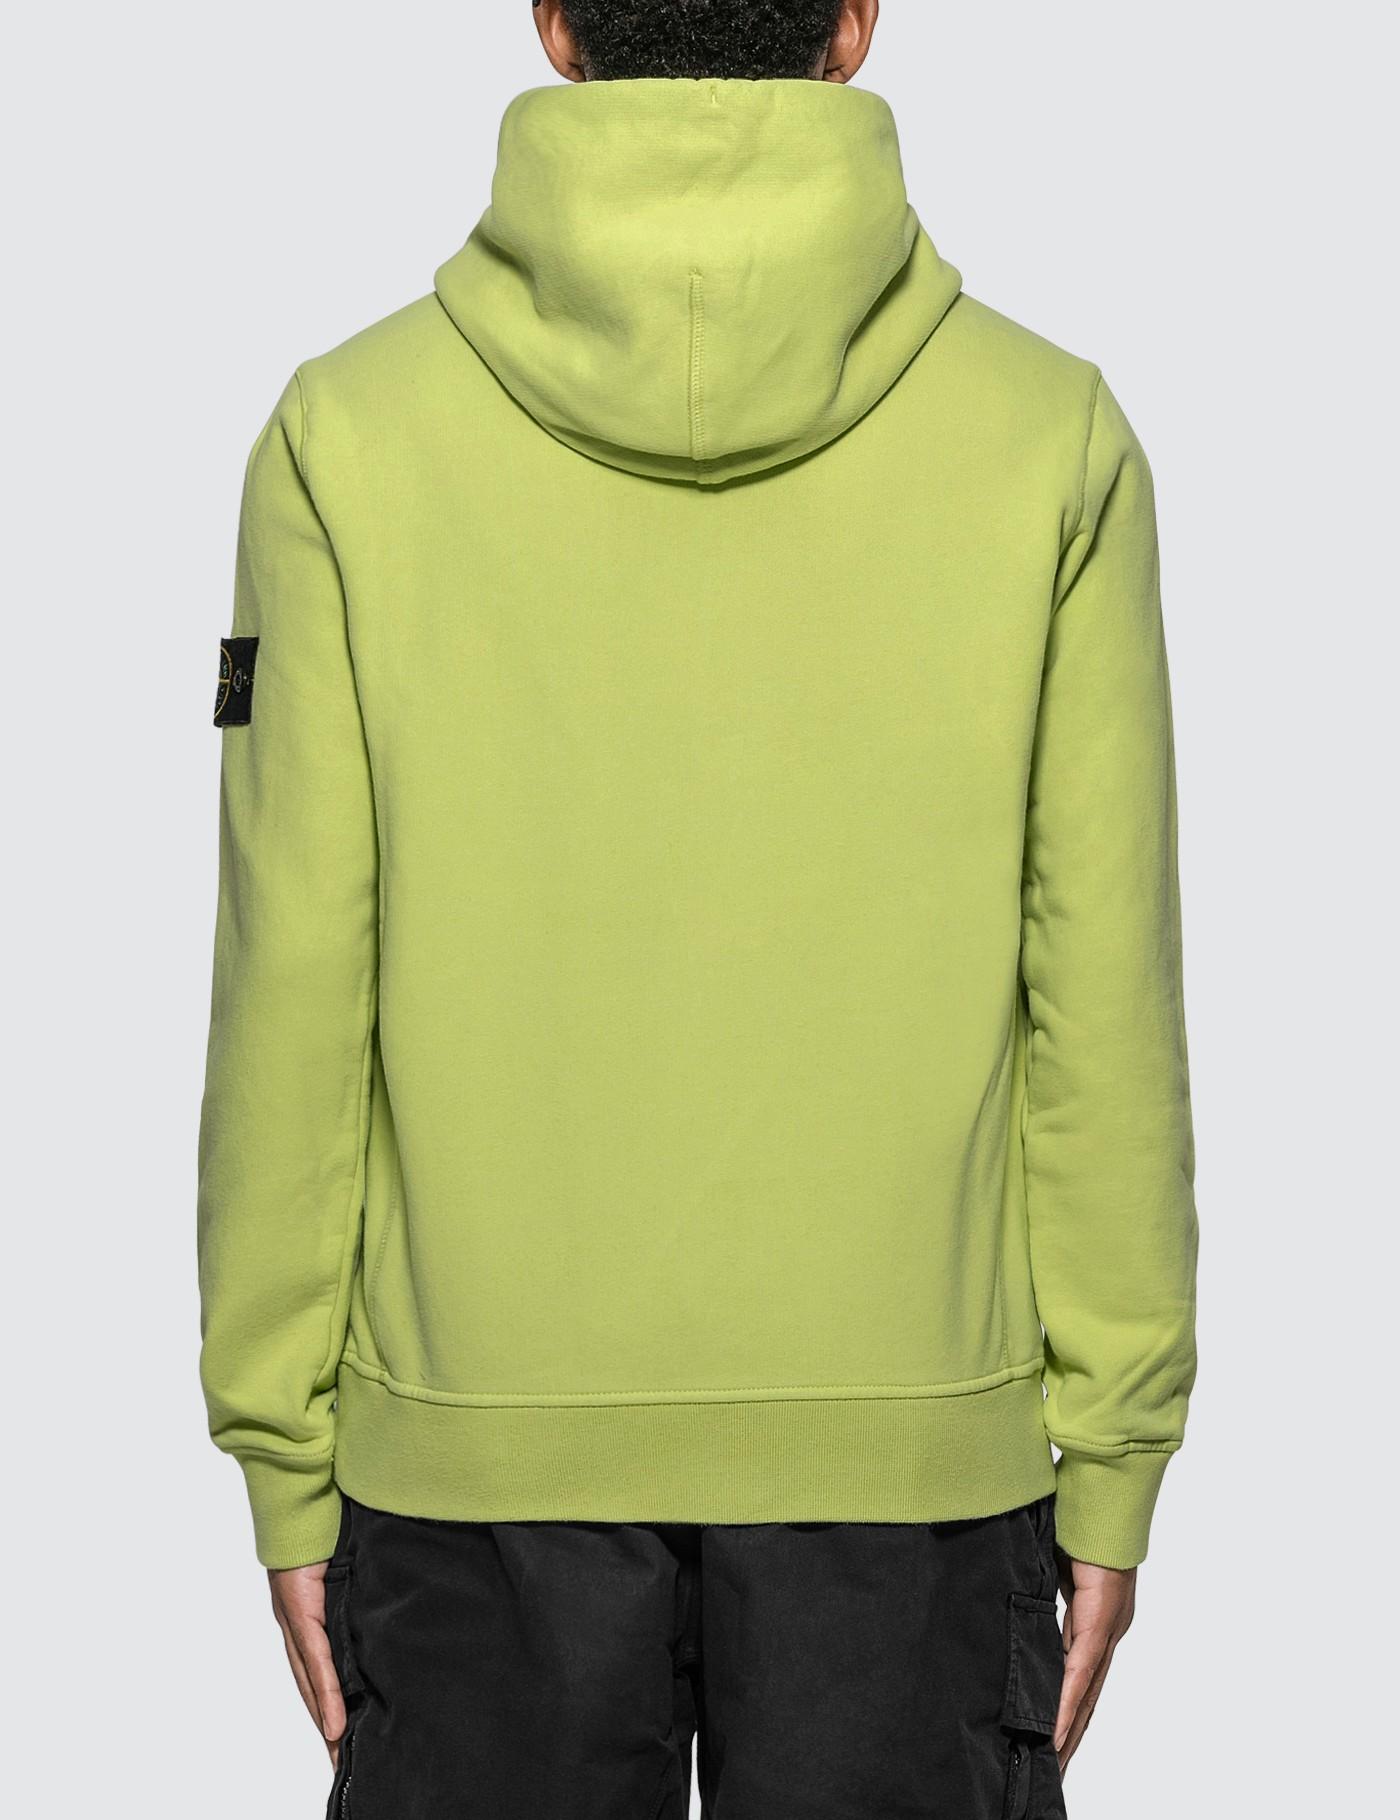 Stone Island Cotton Compass Logo Patch Hoodie in Green for Men - Lyst